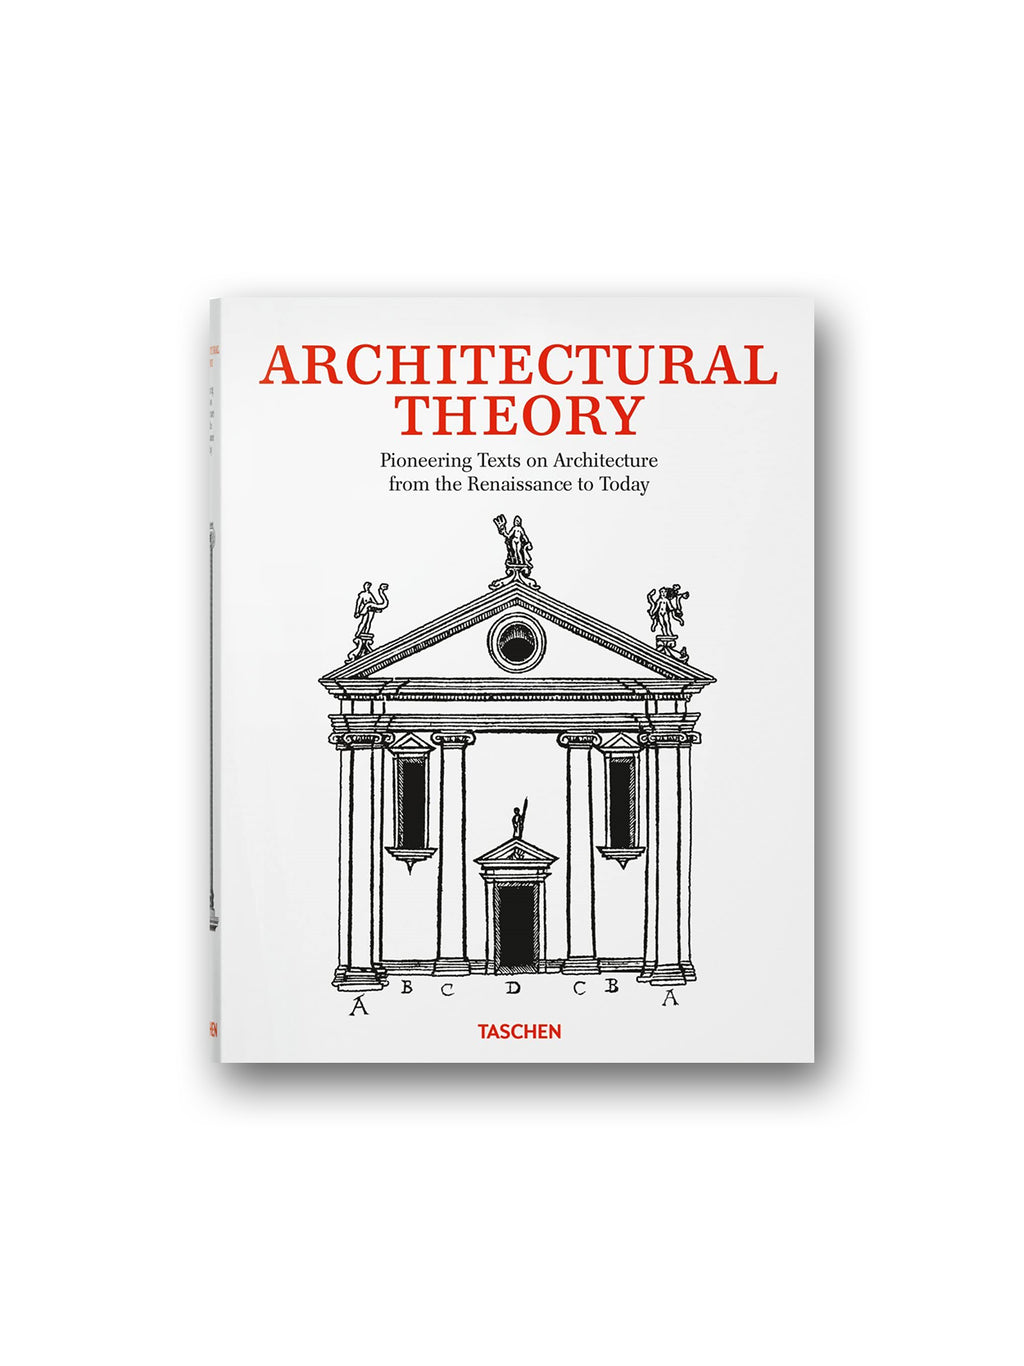 Architectural Theory - Pioneering Texts on Architecture from the Renaissance to Today